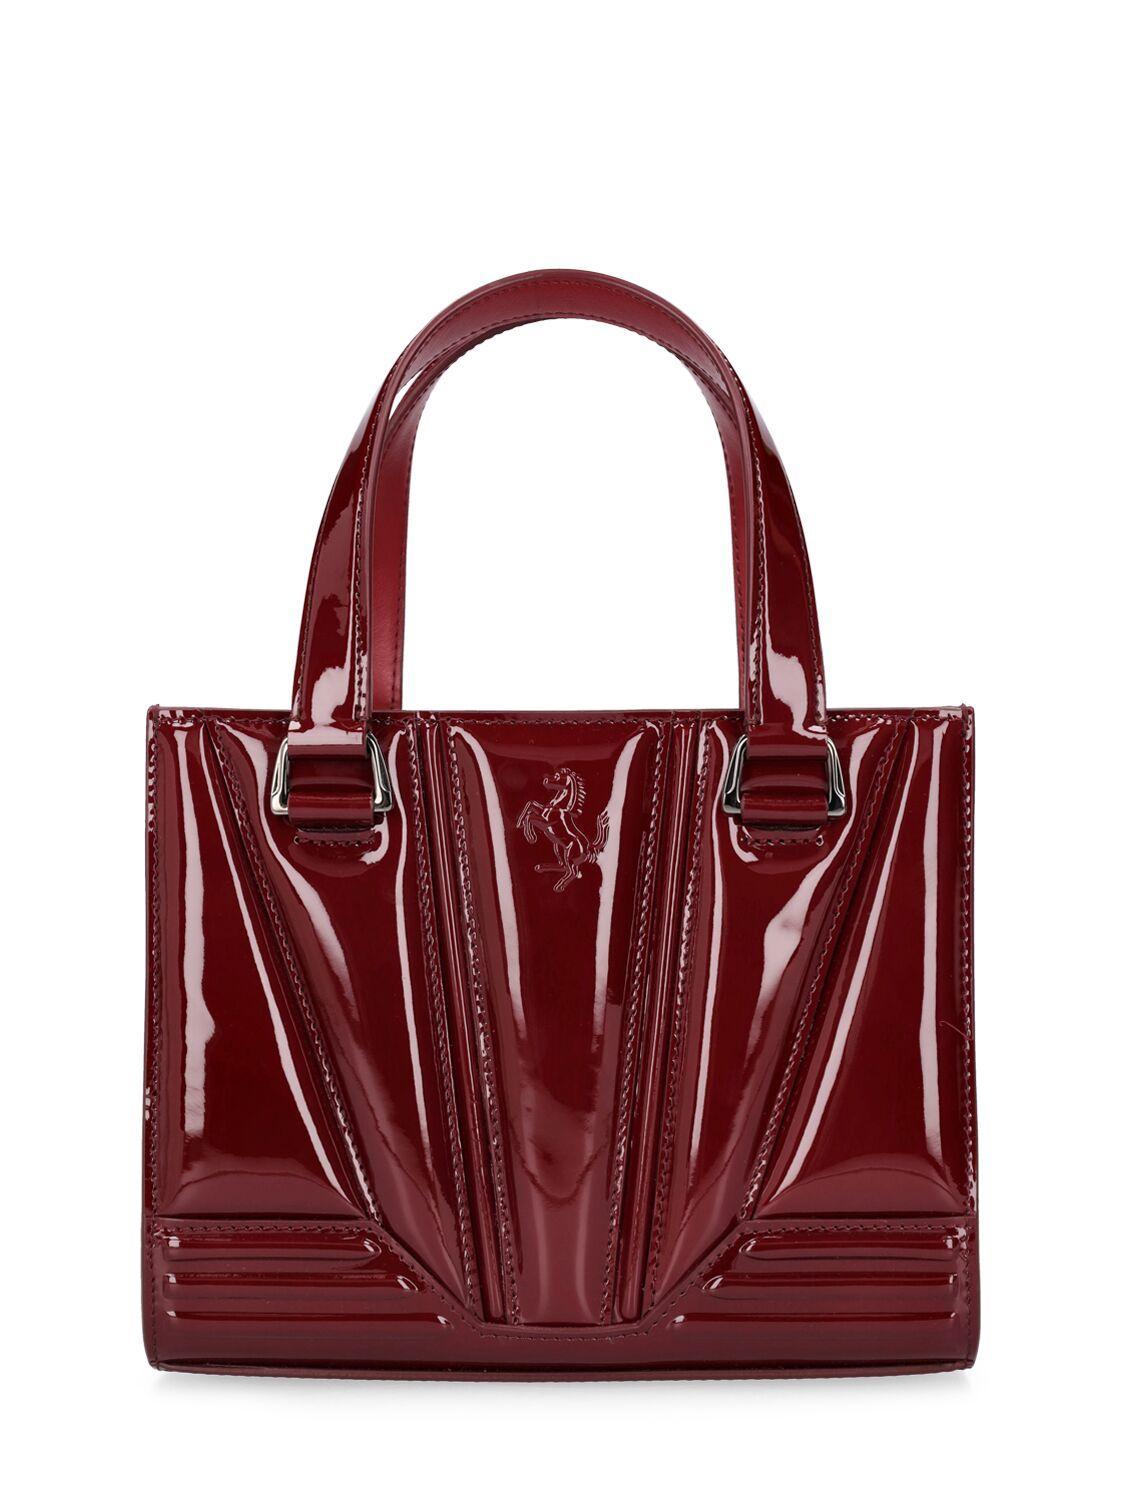 Ferrari Mini Varnished Leather Tote Bag in Red | Lyst